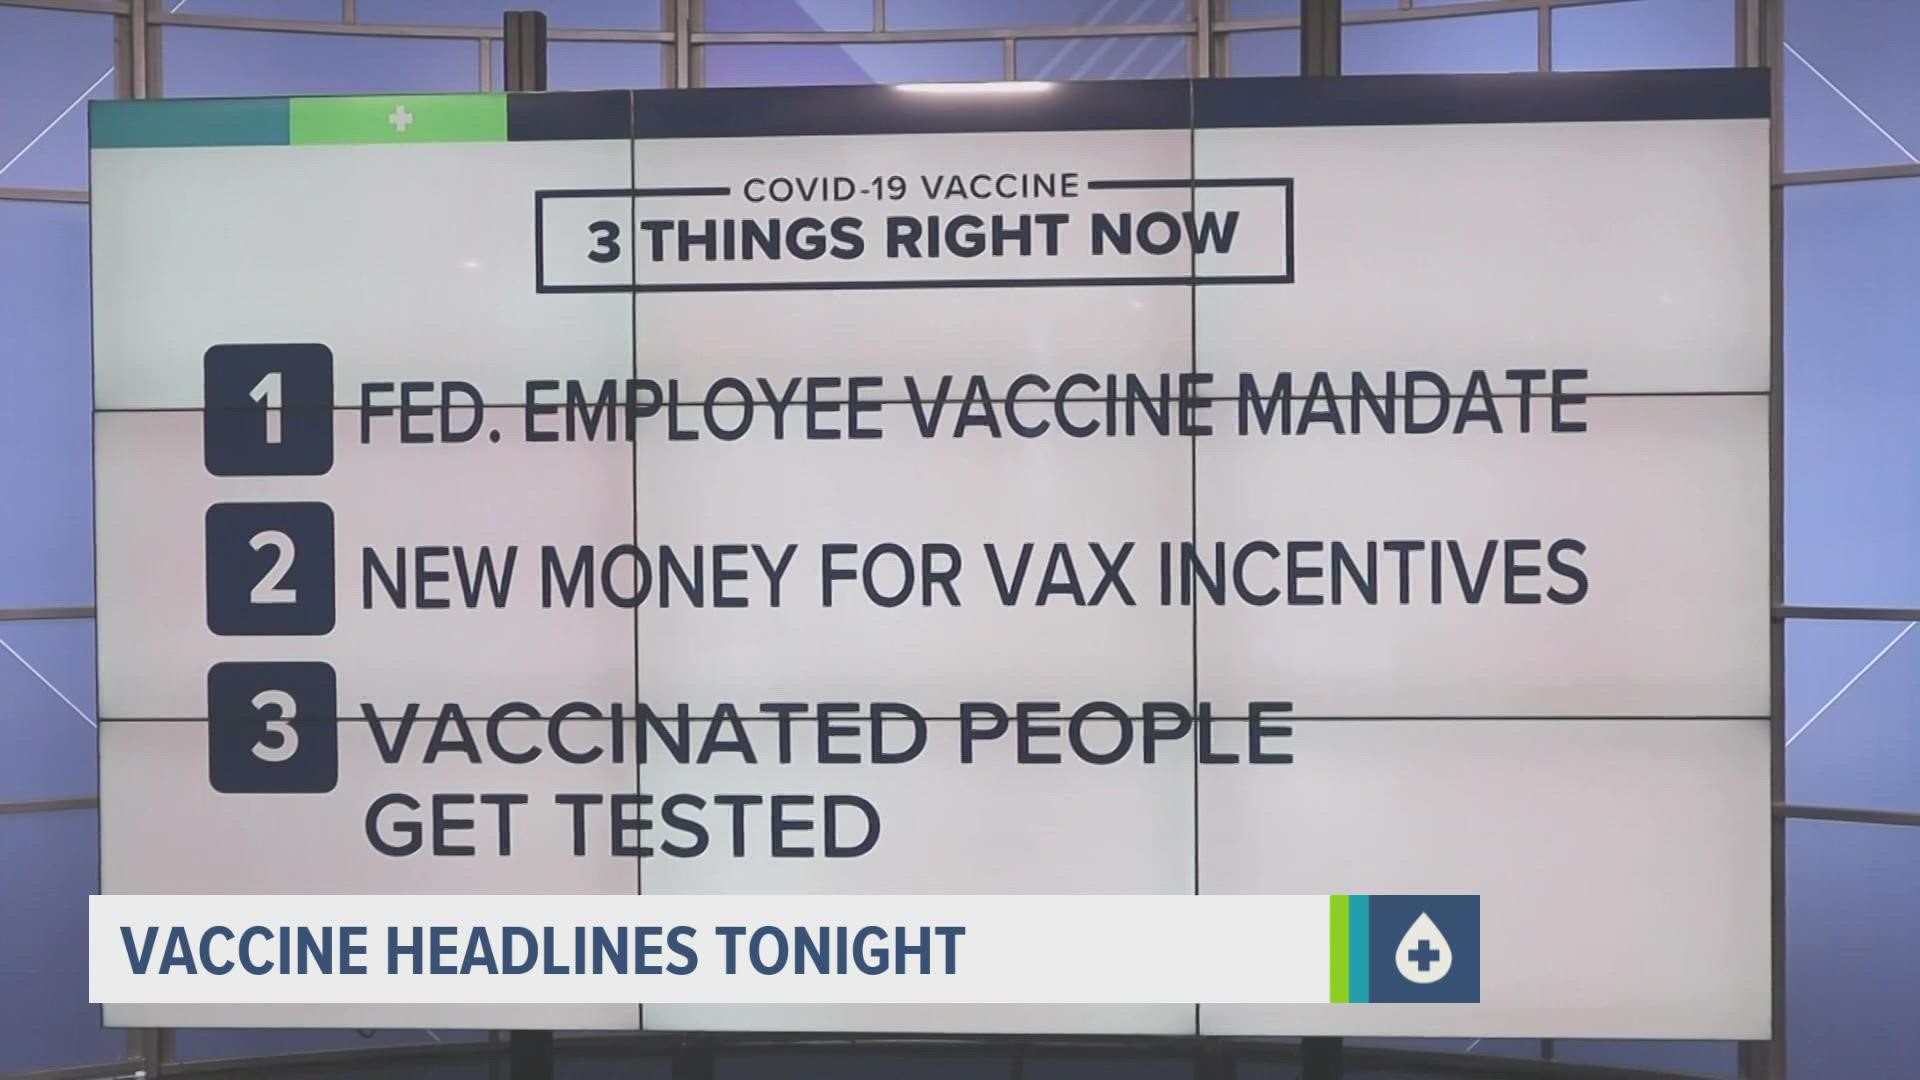 President Biden officially called for a vaccine mandate for all federal employees and called on governors to provide more incentives.